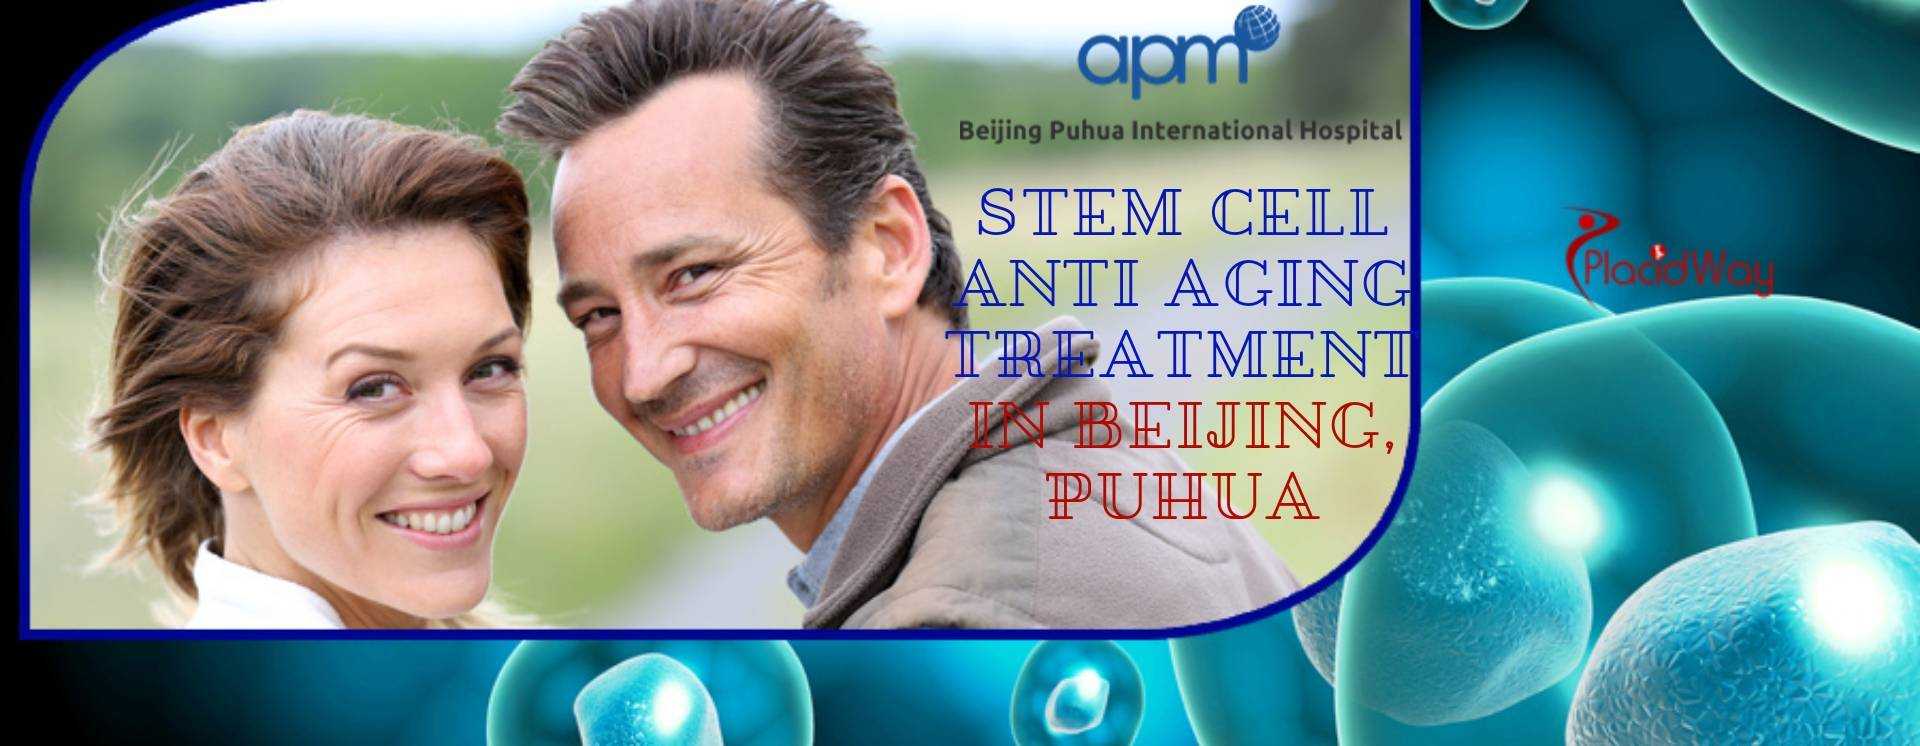 Stem Cell Anti Aging Treatment in Beijing, Puhua